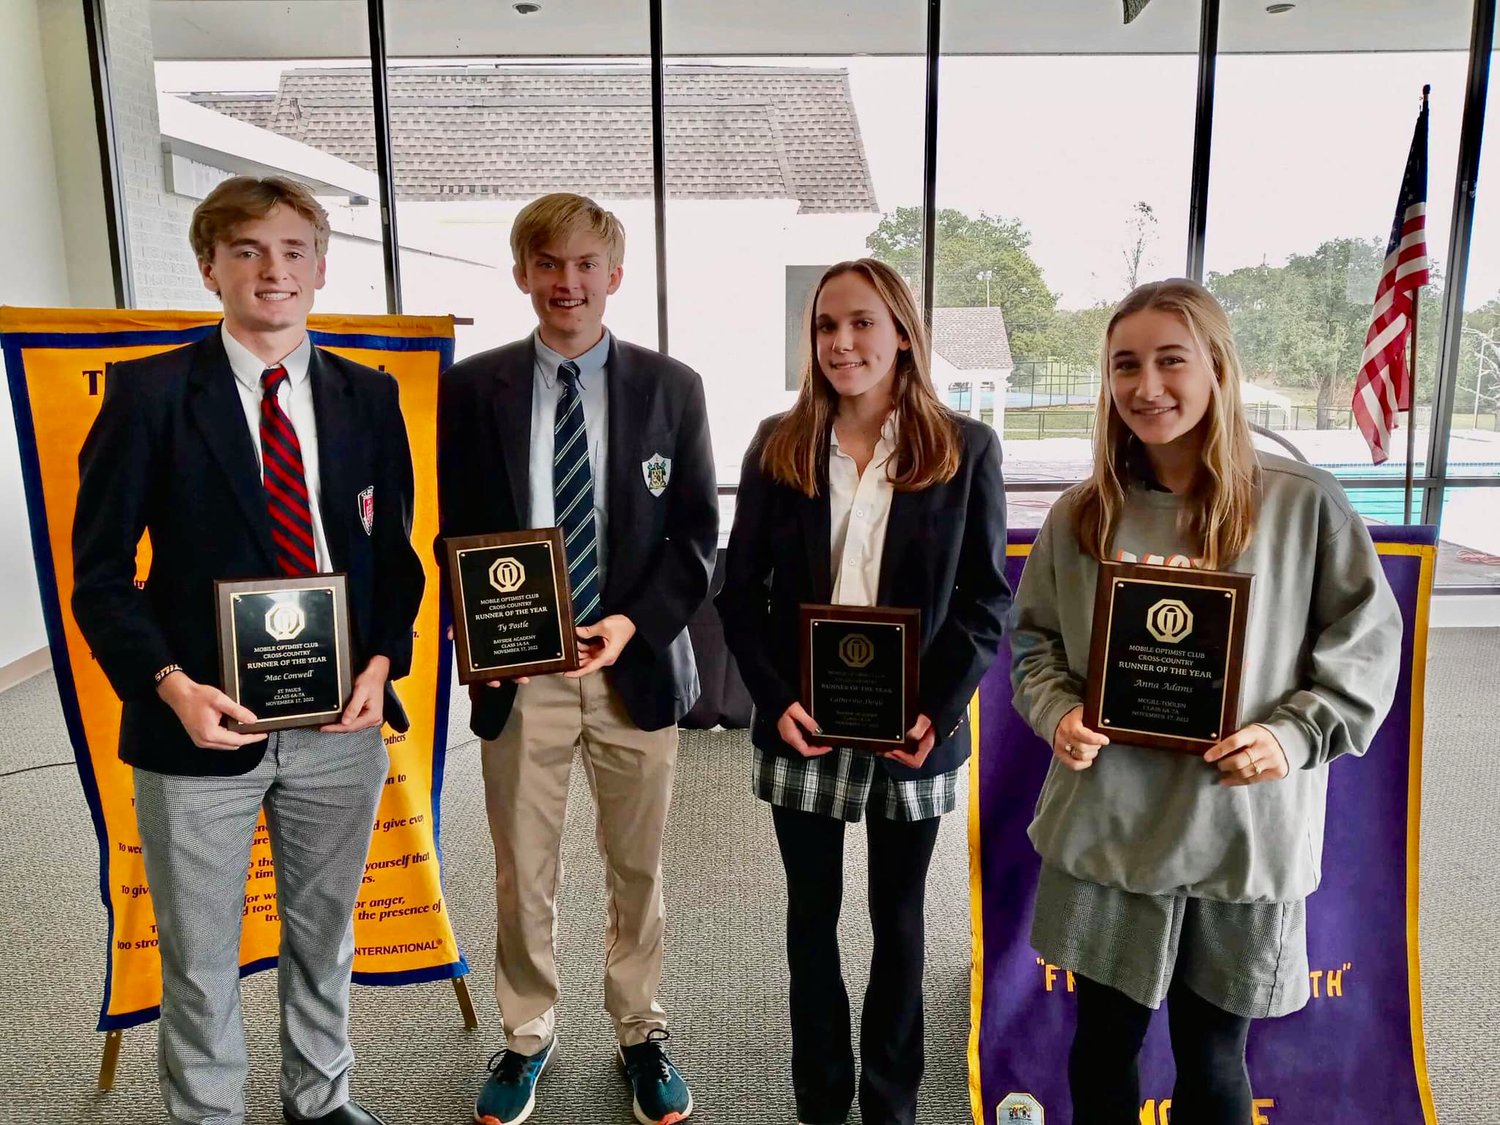 Bayside Academy’s Ty Postle and Catherine Doyle, center, were selected as the Baldwin County Runners of the Year as awarded by the Mobile Optimist Club. They were joined by Mac Conwell from St. Paul’s and Anna Adams from McGill-Toolen in being recognized at the Nov. 17 luncheon.